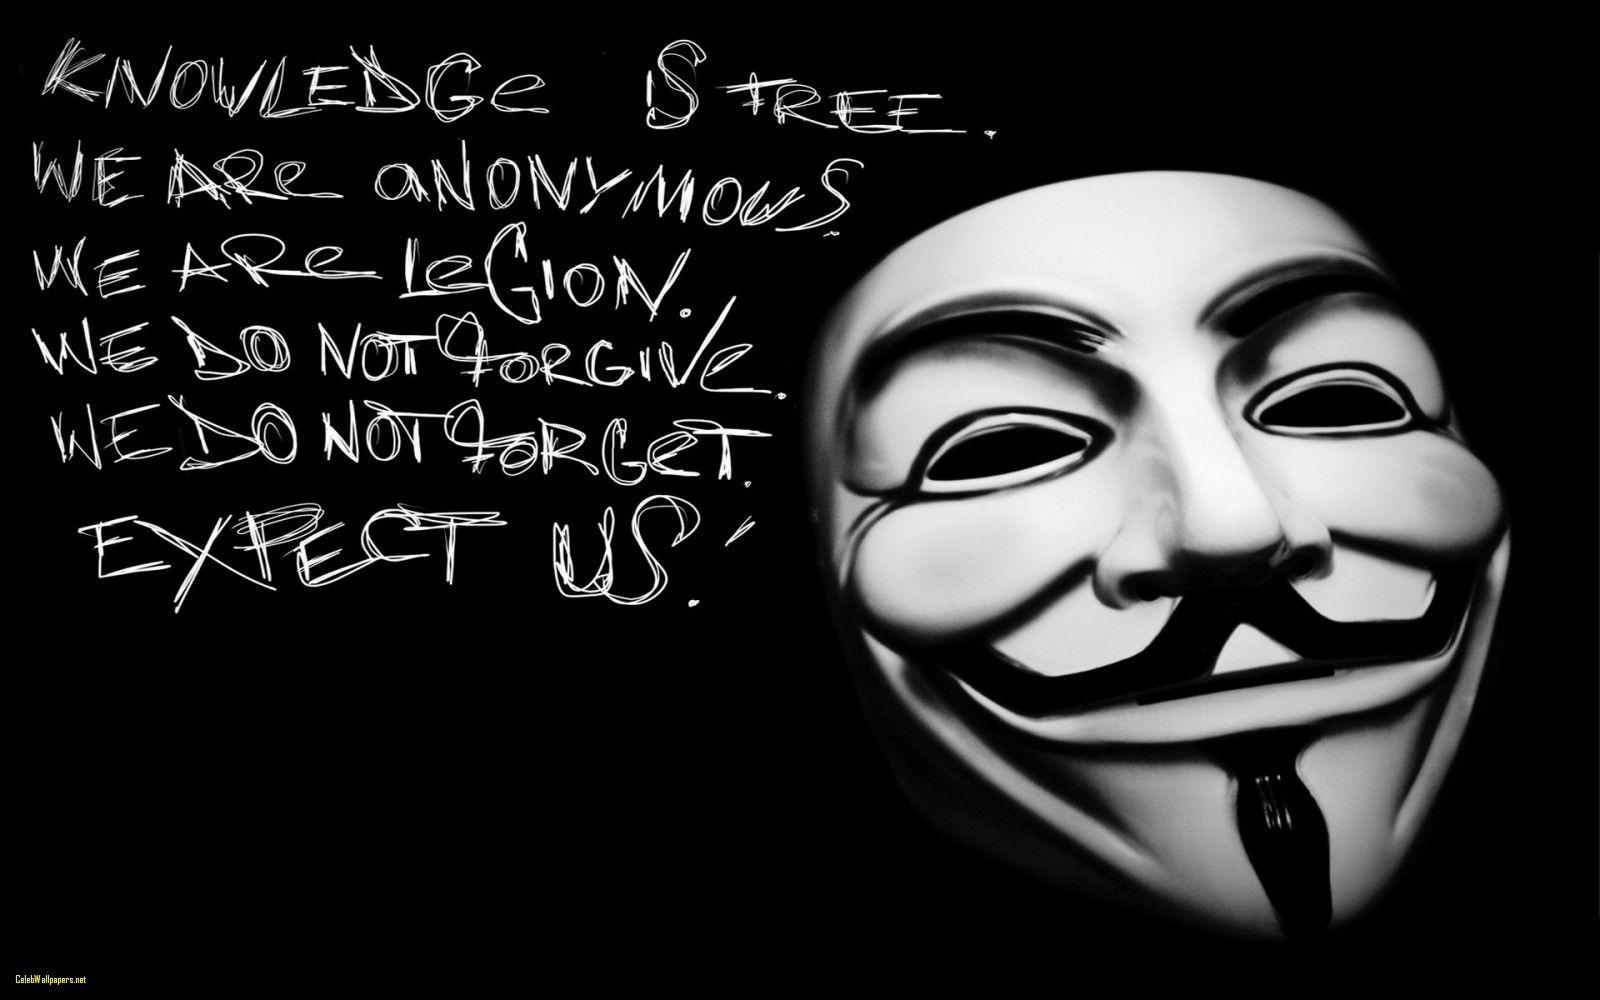 Anonymous Wallpaper HD Lovely Download Cool Anonymous Hackers